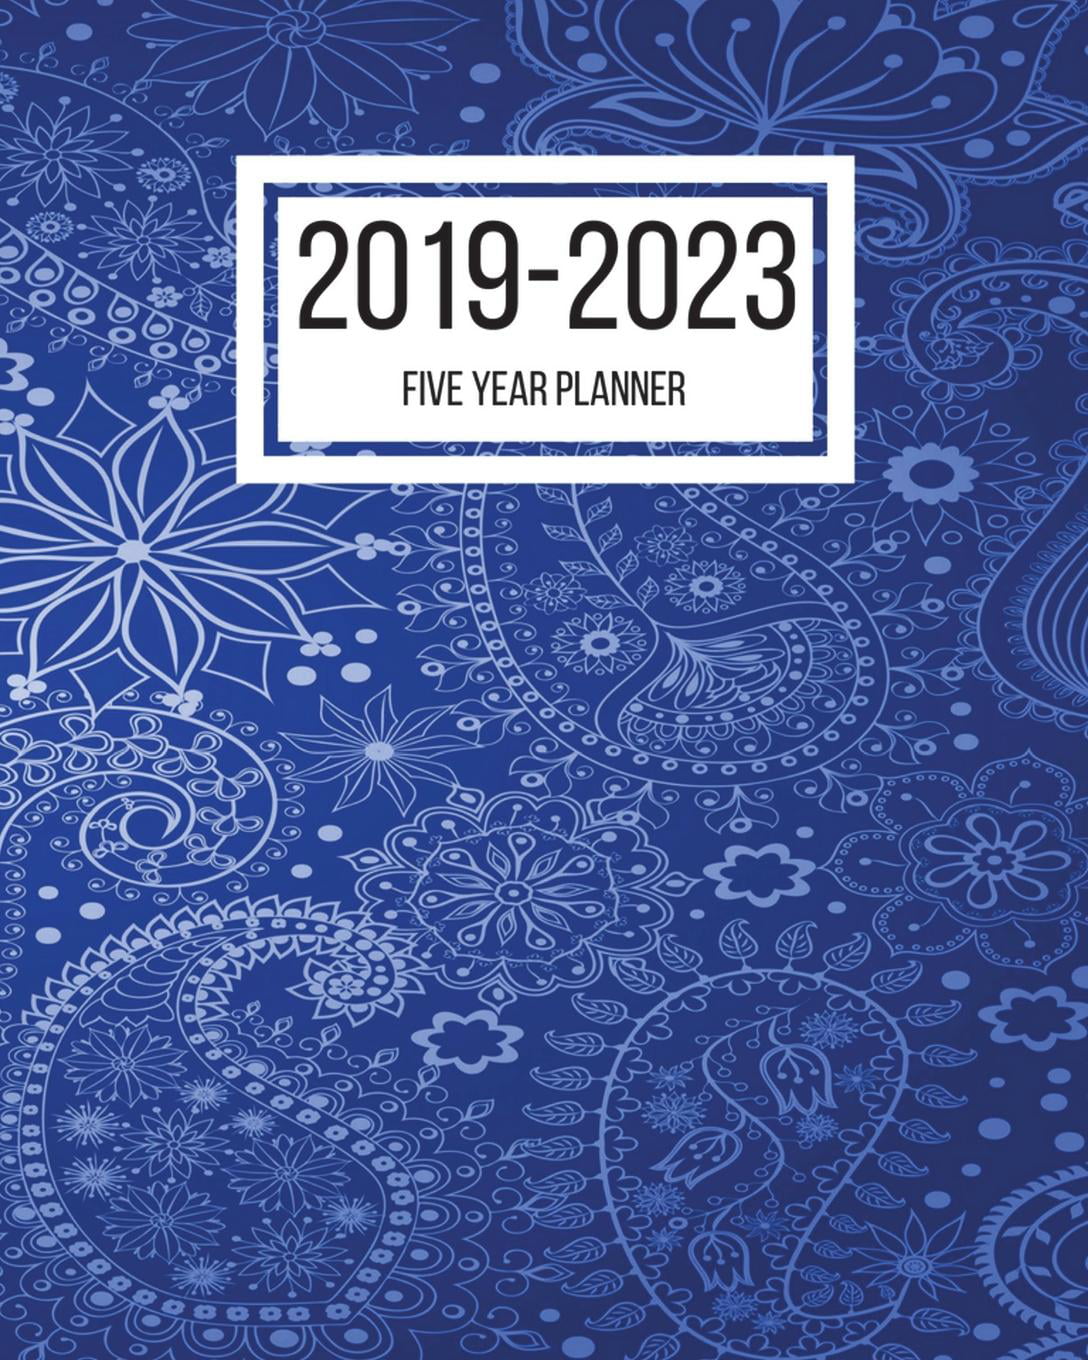 2019-2023 Planner: 2019-2023 Five Year Planner: 60 Months Planner - 8 X 10 Inches - Paperback ...